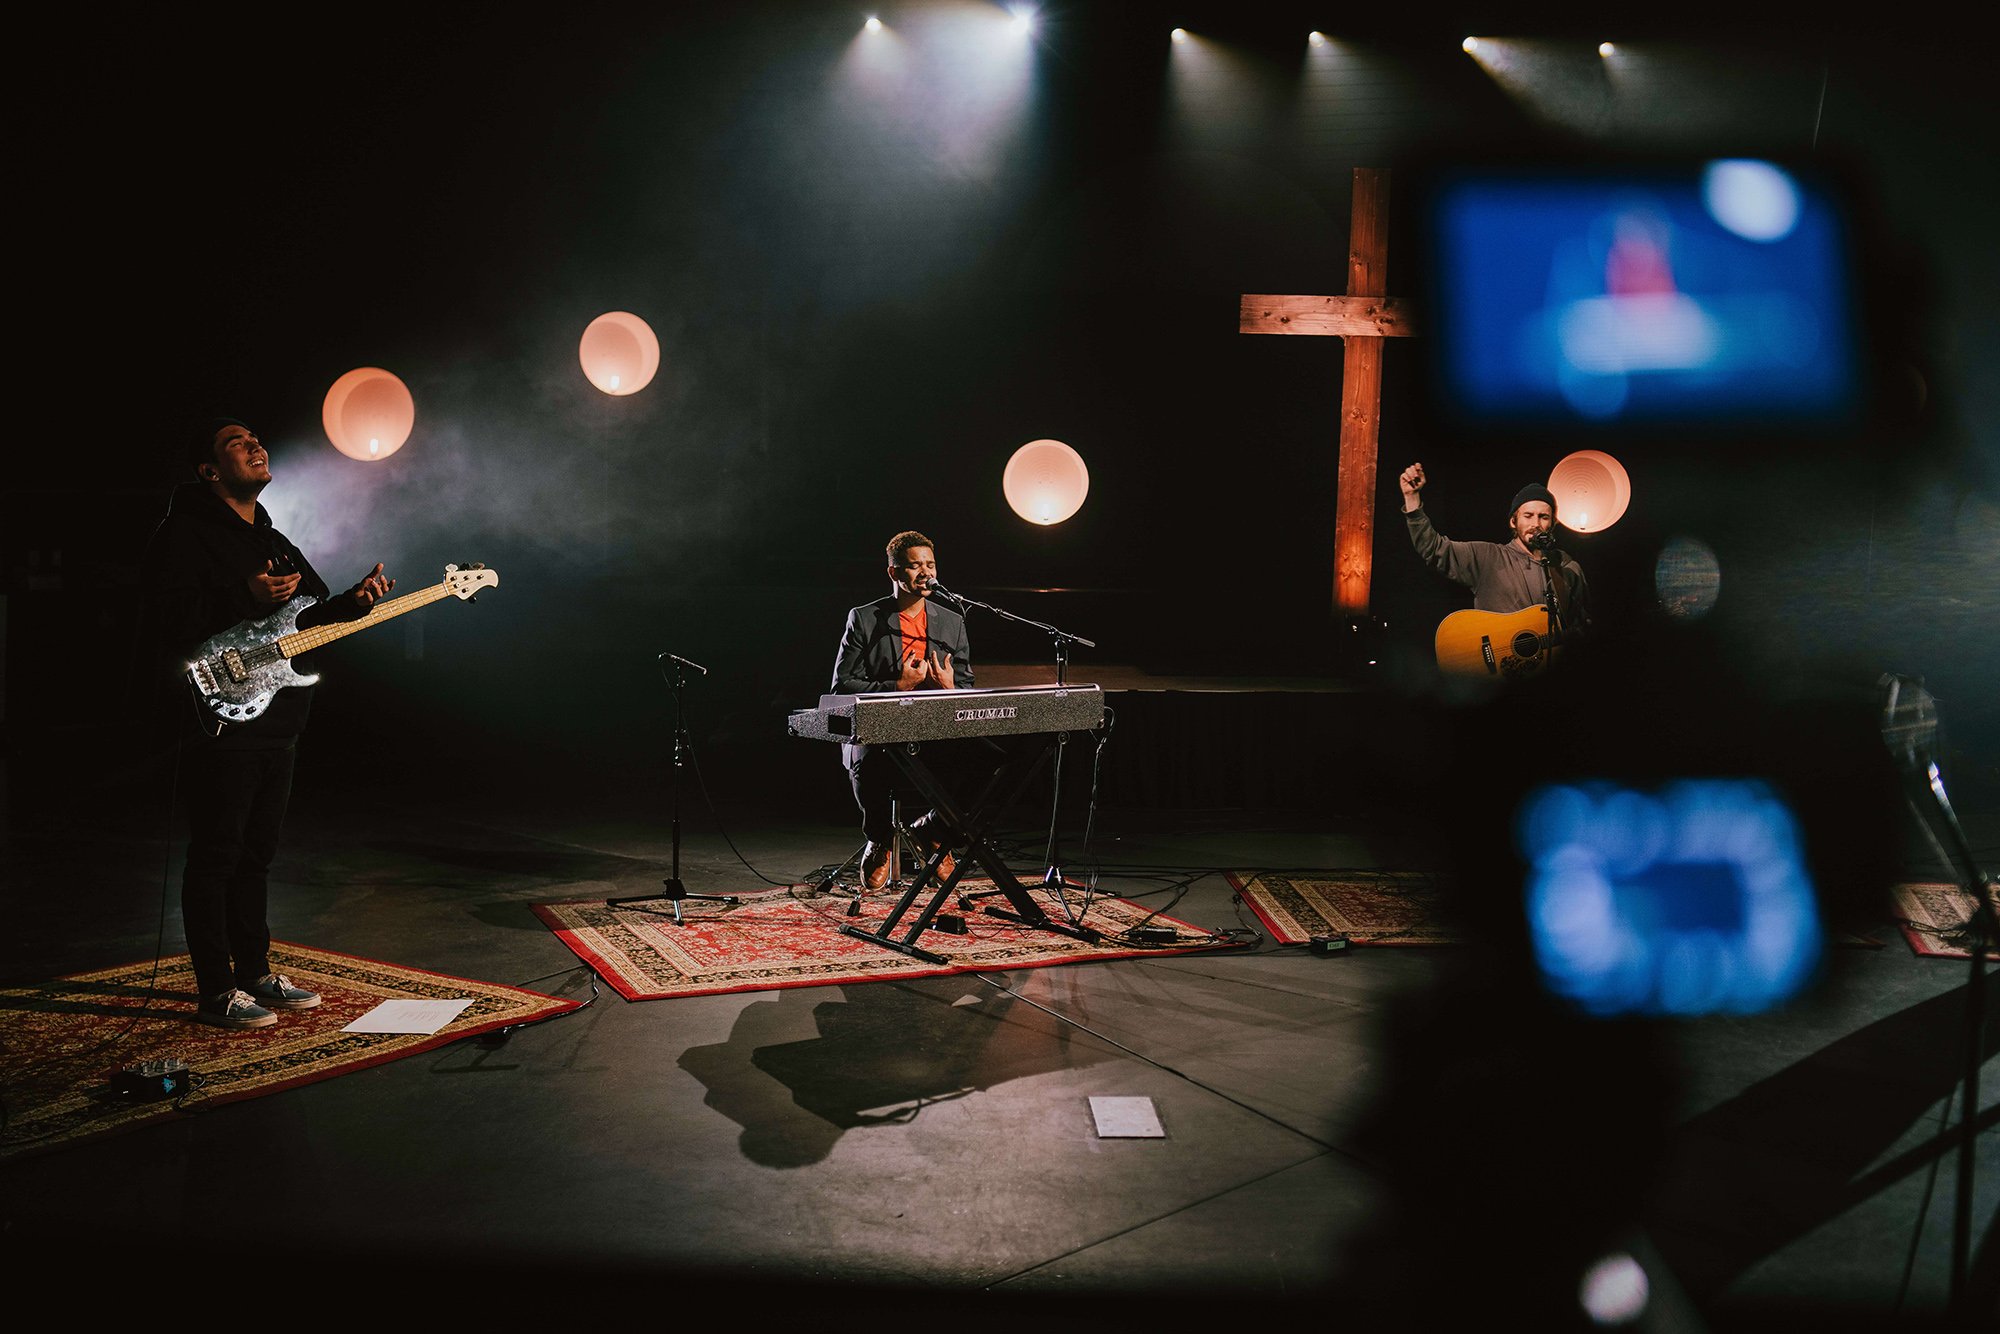 Socially distanced worship band in dark studio playing in front of crucifix.  Each band member has their own rug. Left to right: bassist with hands apart in praise, keyboardist singing, acoustic guitarist with one fist raised.